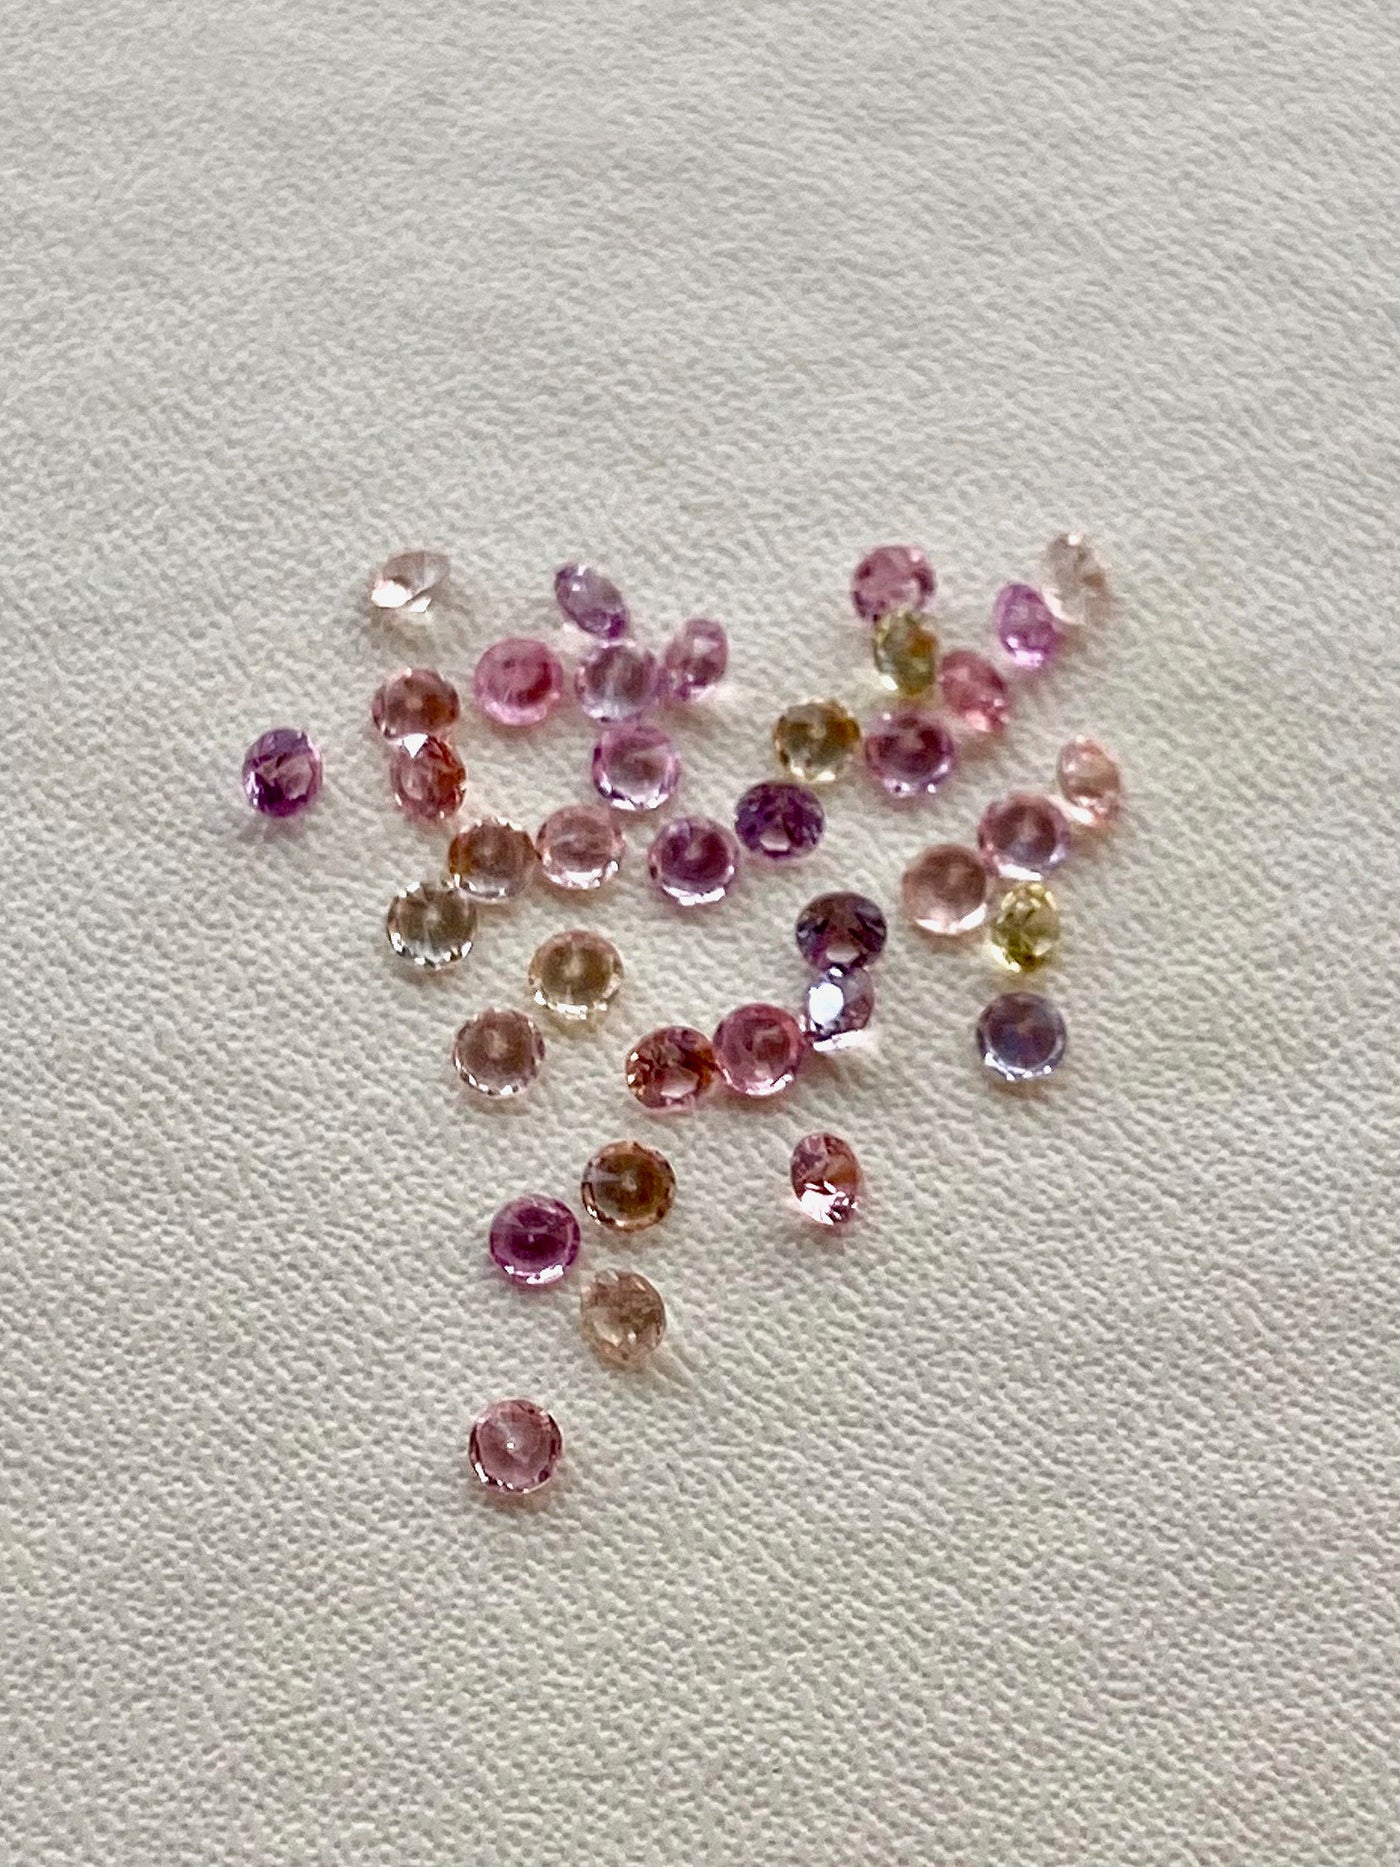 Montana Sapphires in pink, purple, and green